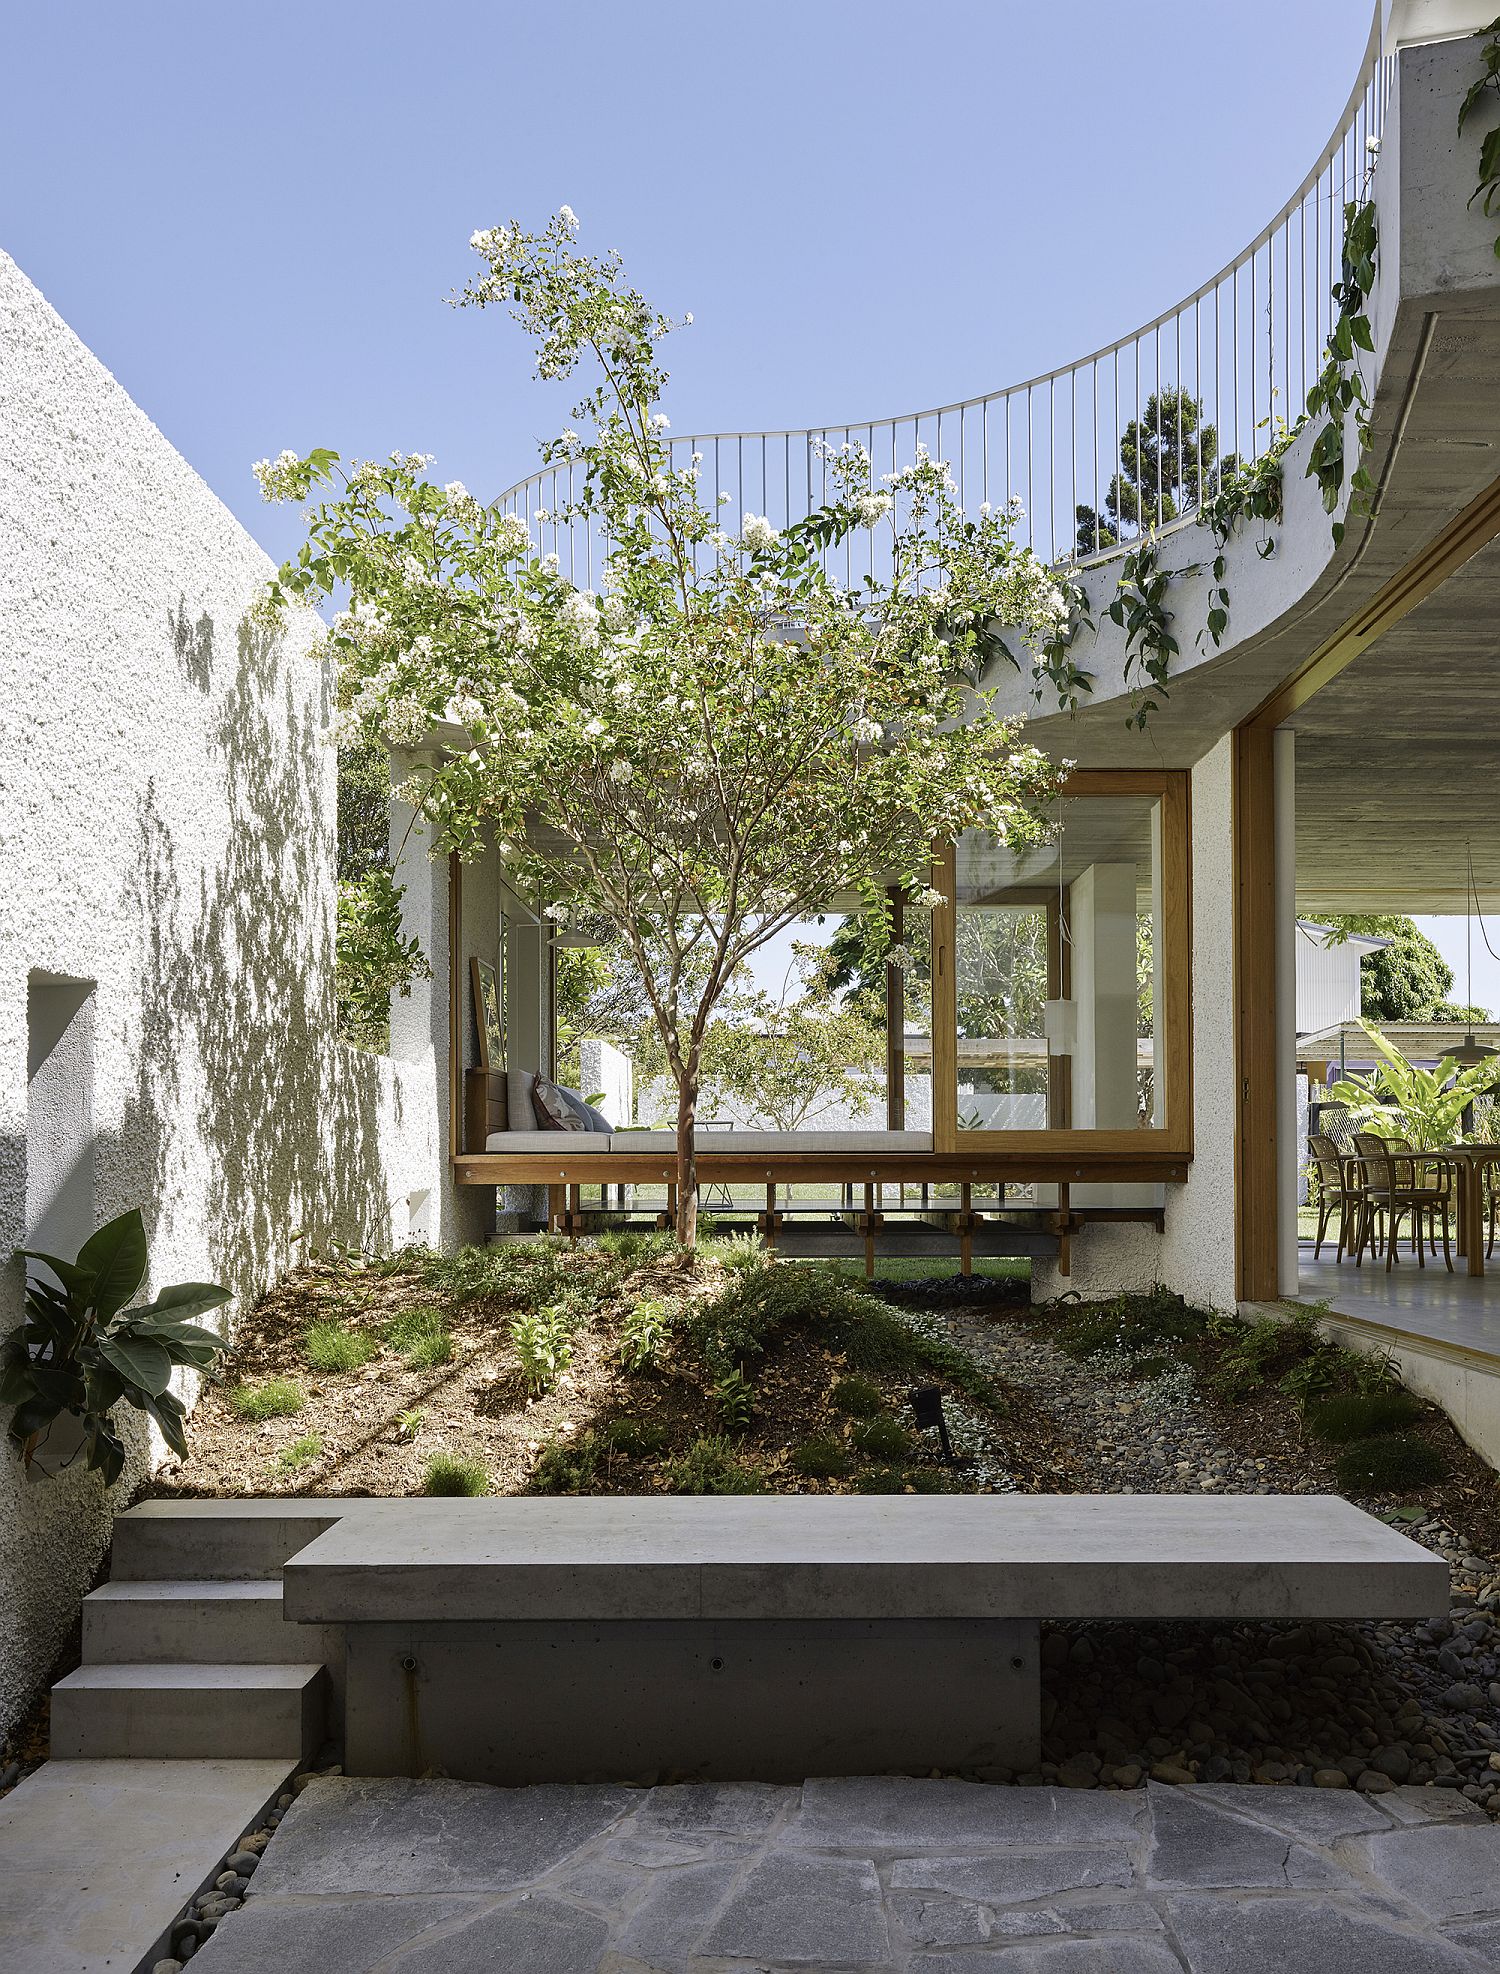 Open-central-courtyard-spaces-and-gardens-give-the-rear-section-of-the-house-a-relaxing-naturall-appeal